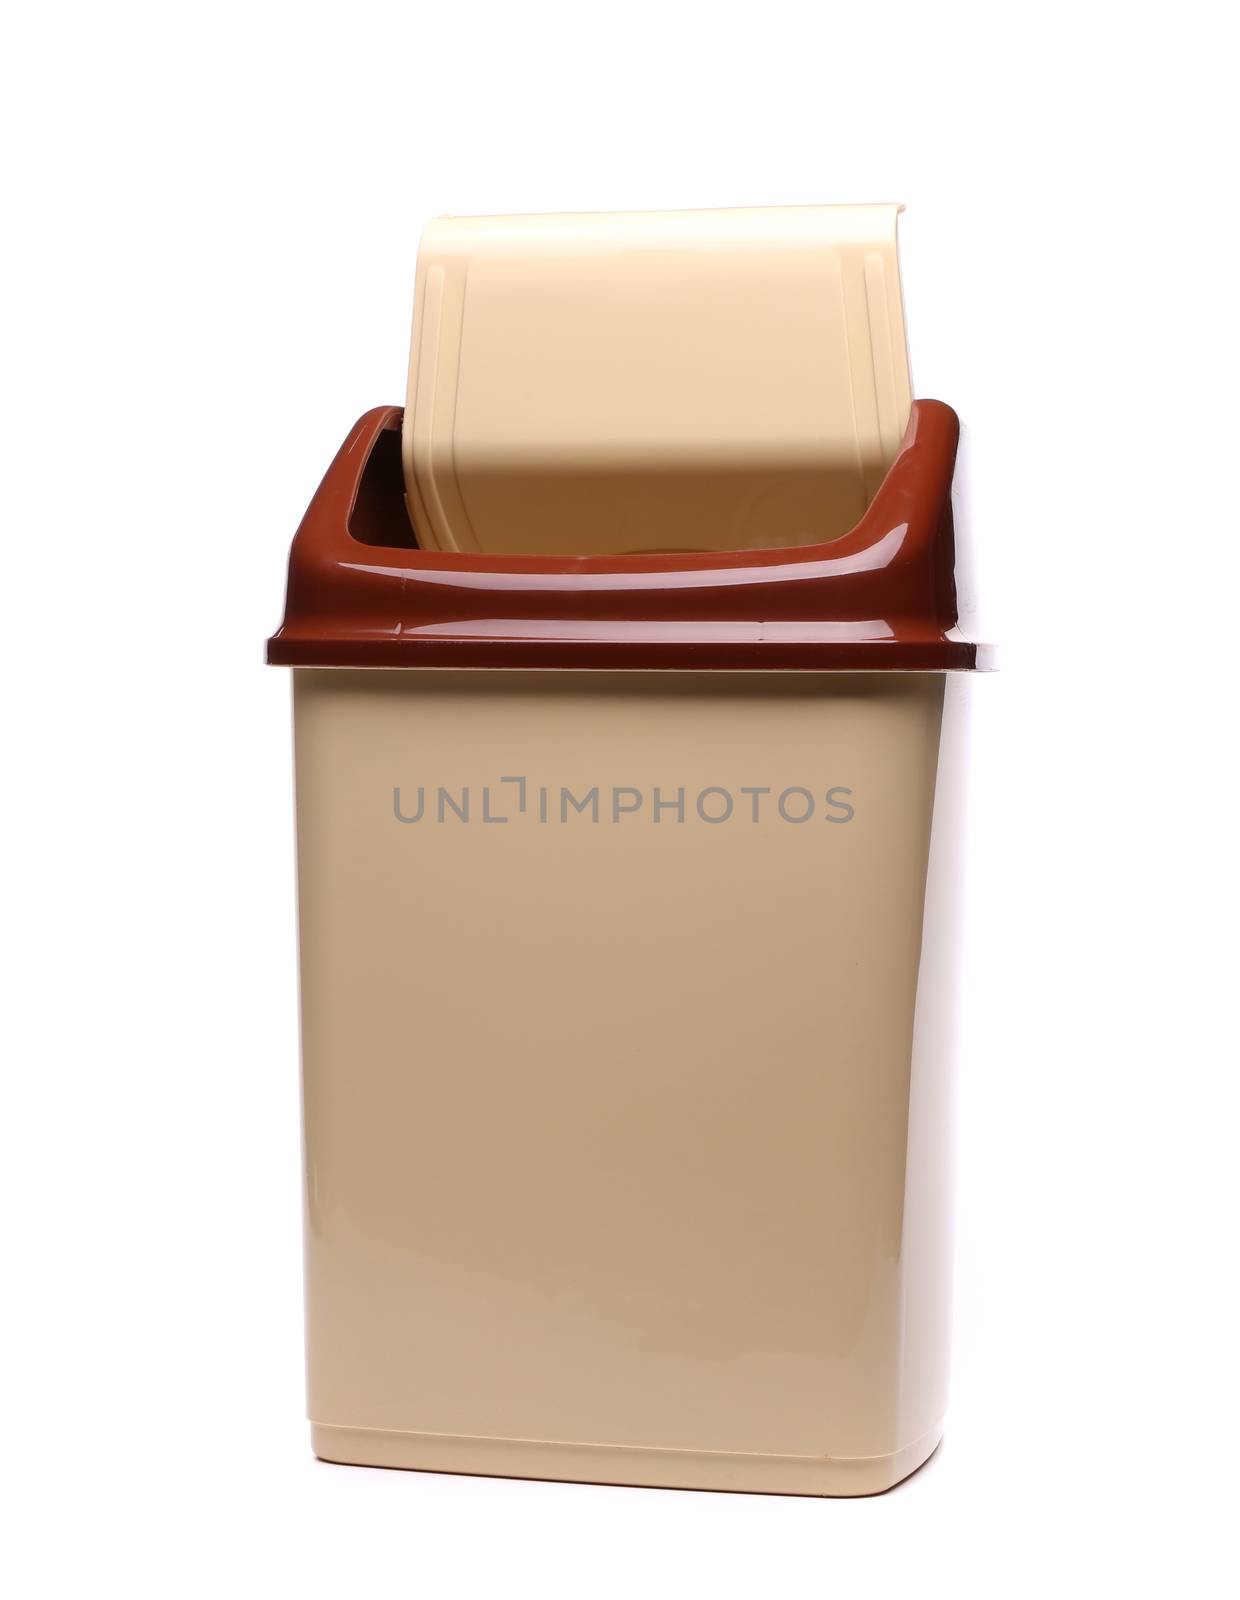 plastic trash can opened on a white background